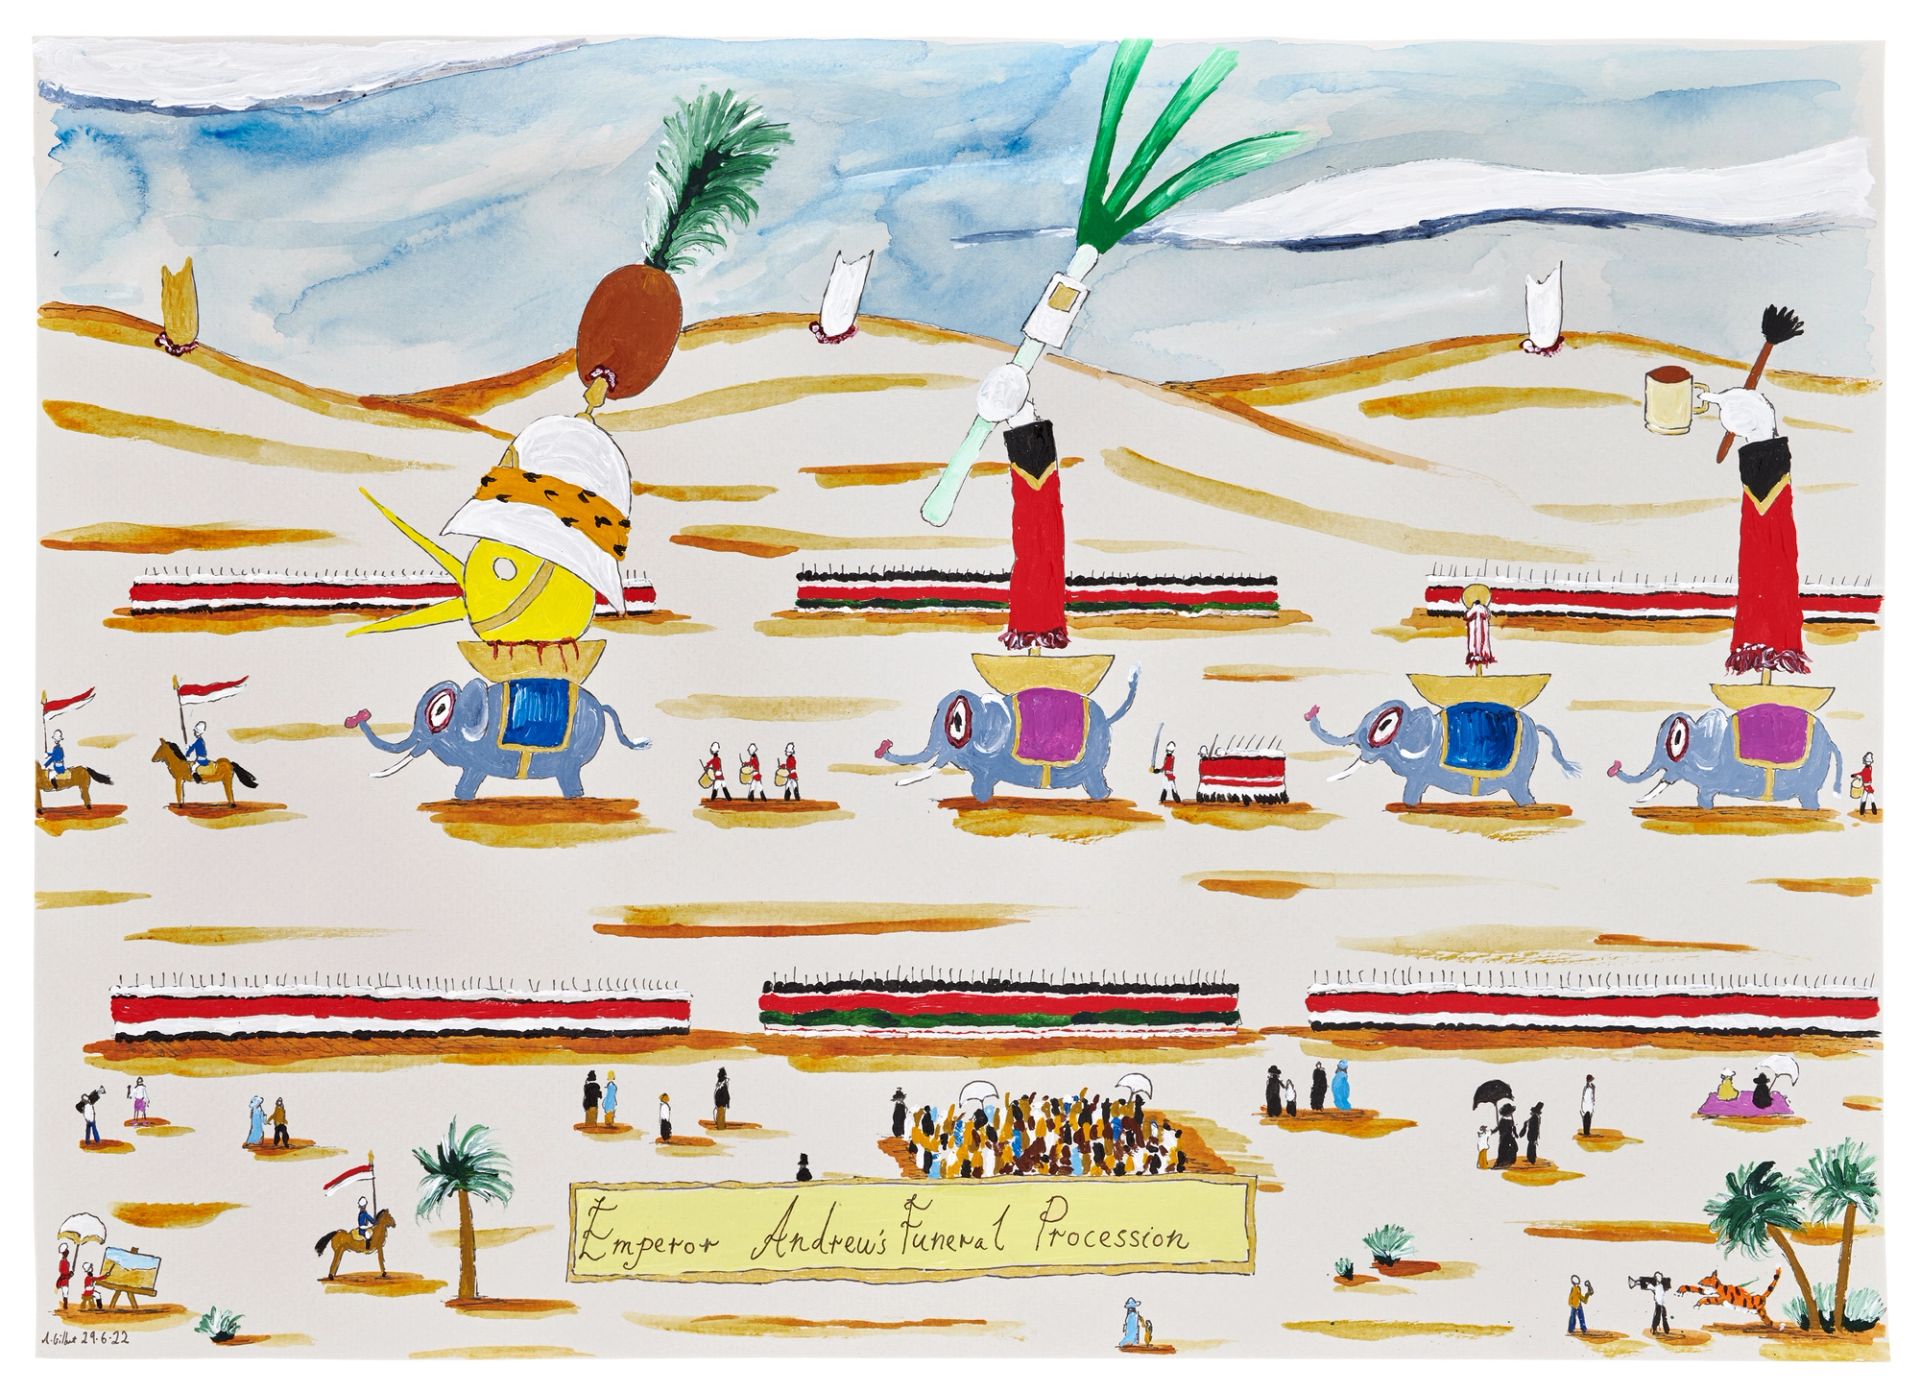 Andrew Gilbert, Emperor Andrew's Funeral Procession, 2022, acrylic, fineliner and watercolor on paper, 30 × 40 cm, photo: Maximilian Rossner